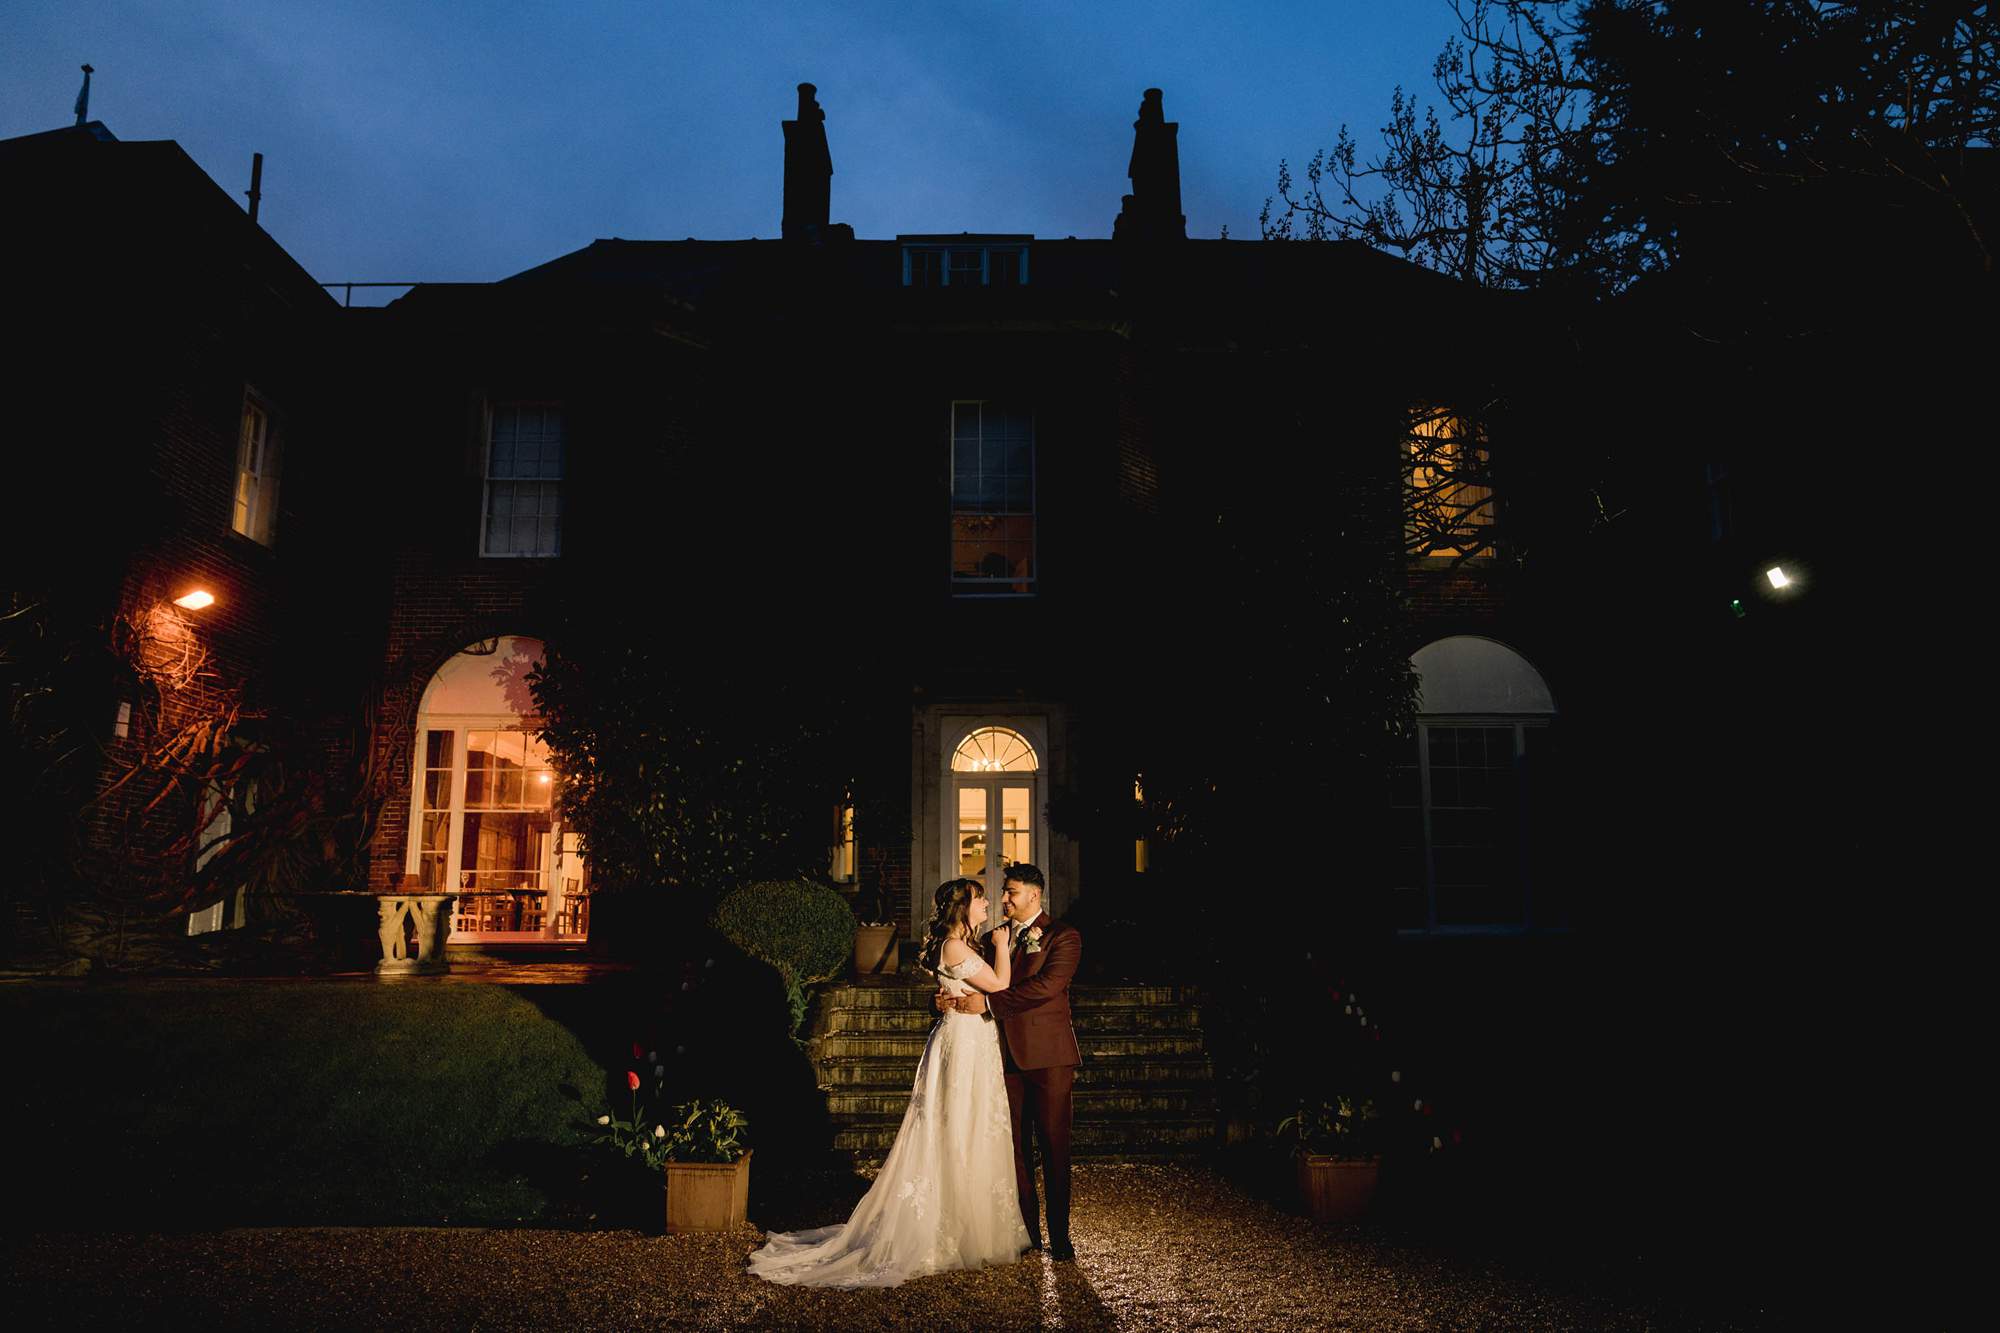 Bride and groom hug closely on their wedding day under the stars at Pelham House.